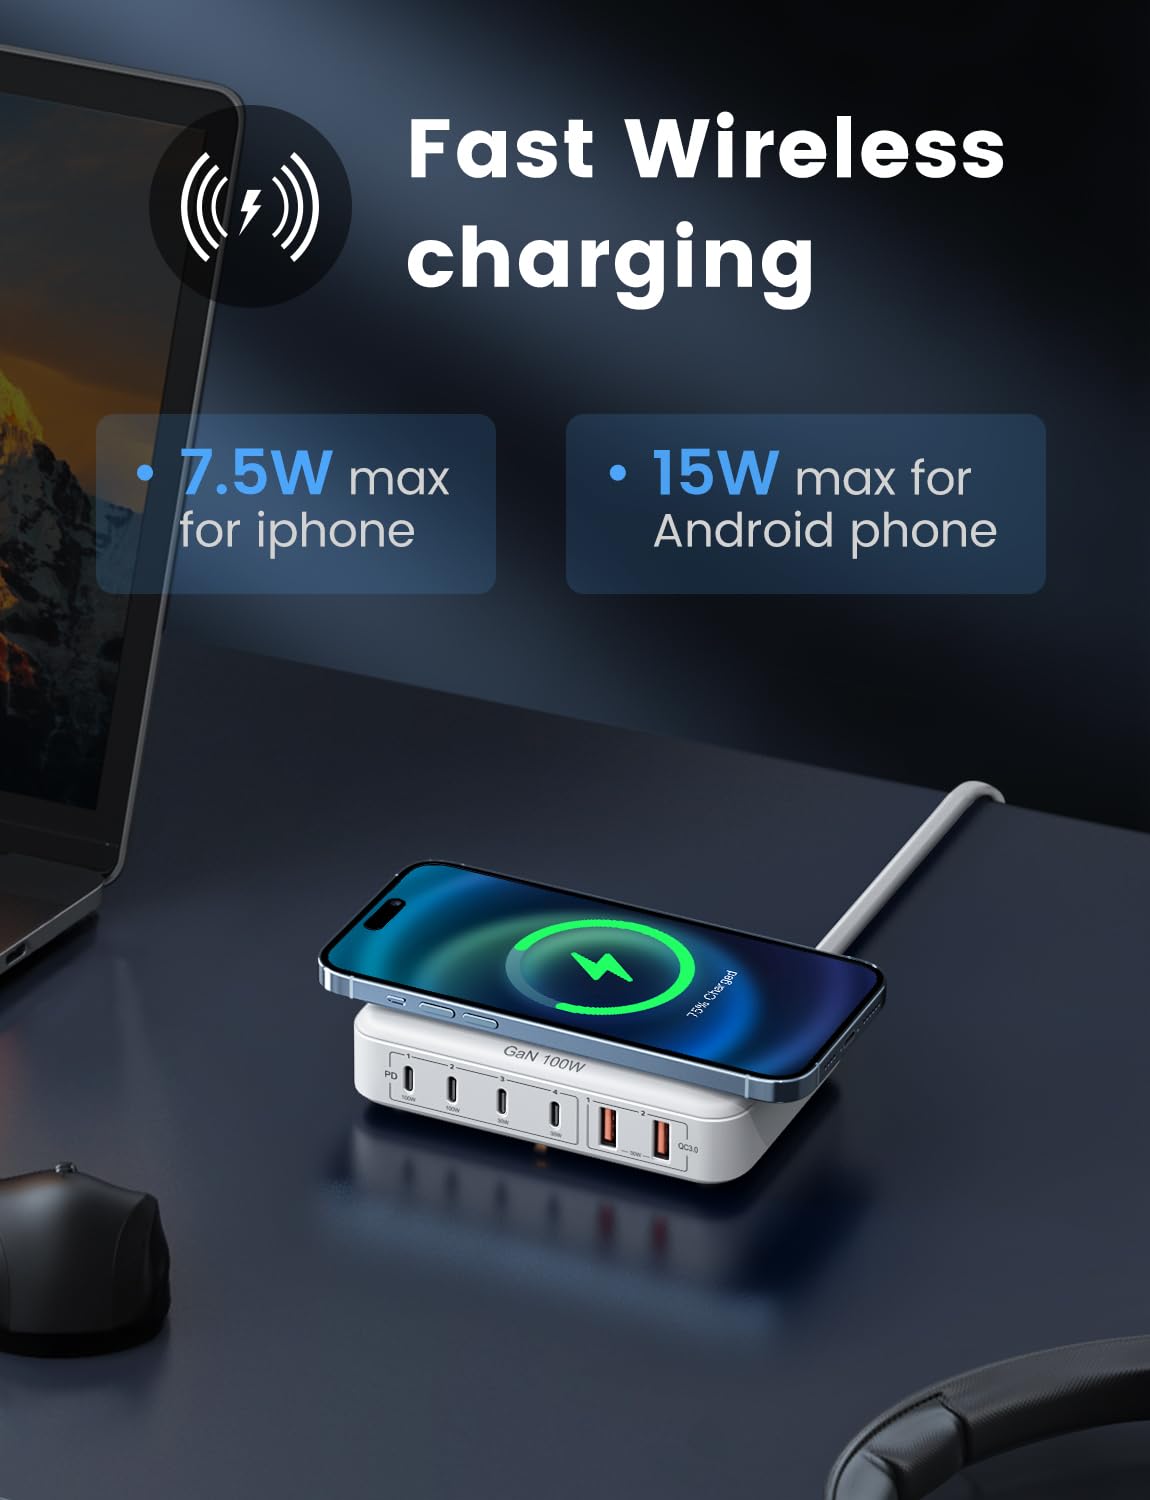 100W USB Charging Station with 15W Wireless Charger, Marnana 6-in-1 Multiple USB Ports(2 USB A and 4 USB C Ports) GaN Desktop Charger for iPhone iPad MacBook Laptop Samsung and Android Devices